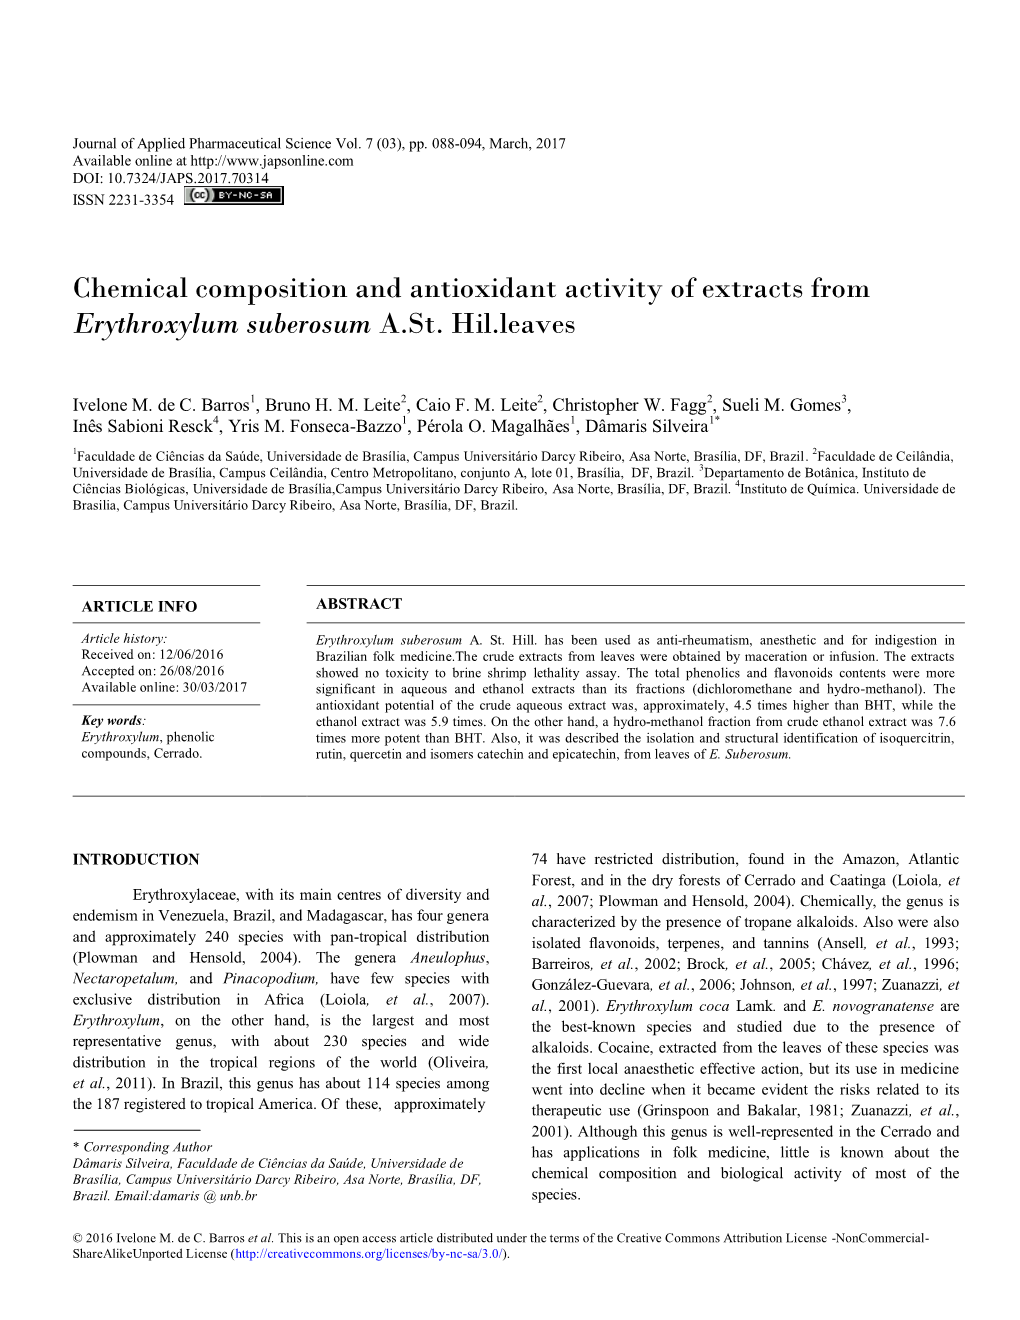 Chemical Composition and Antioxidant Activity of Extracts from Erythroxylum Suberosum A.St